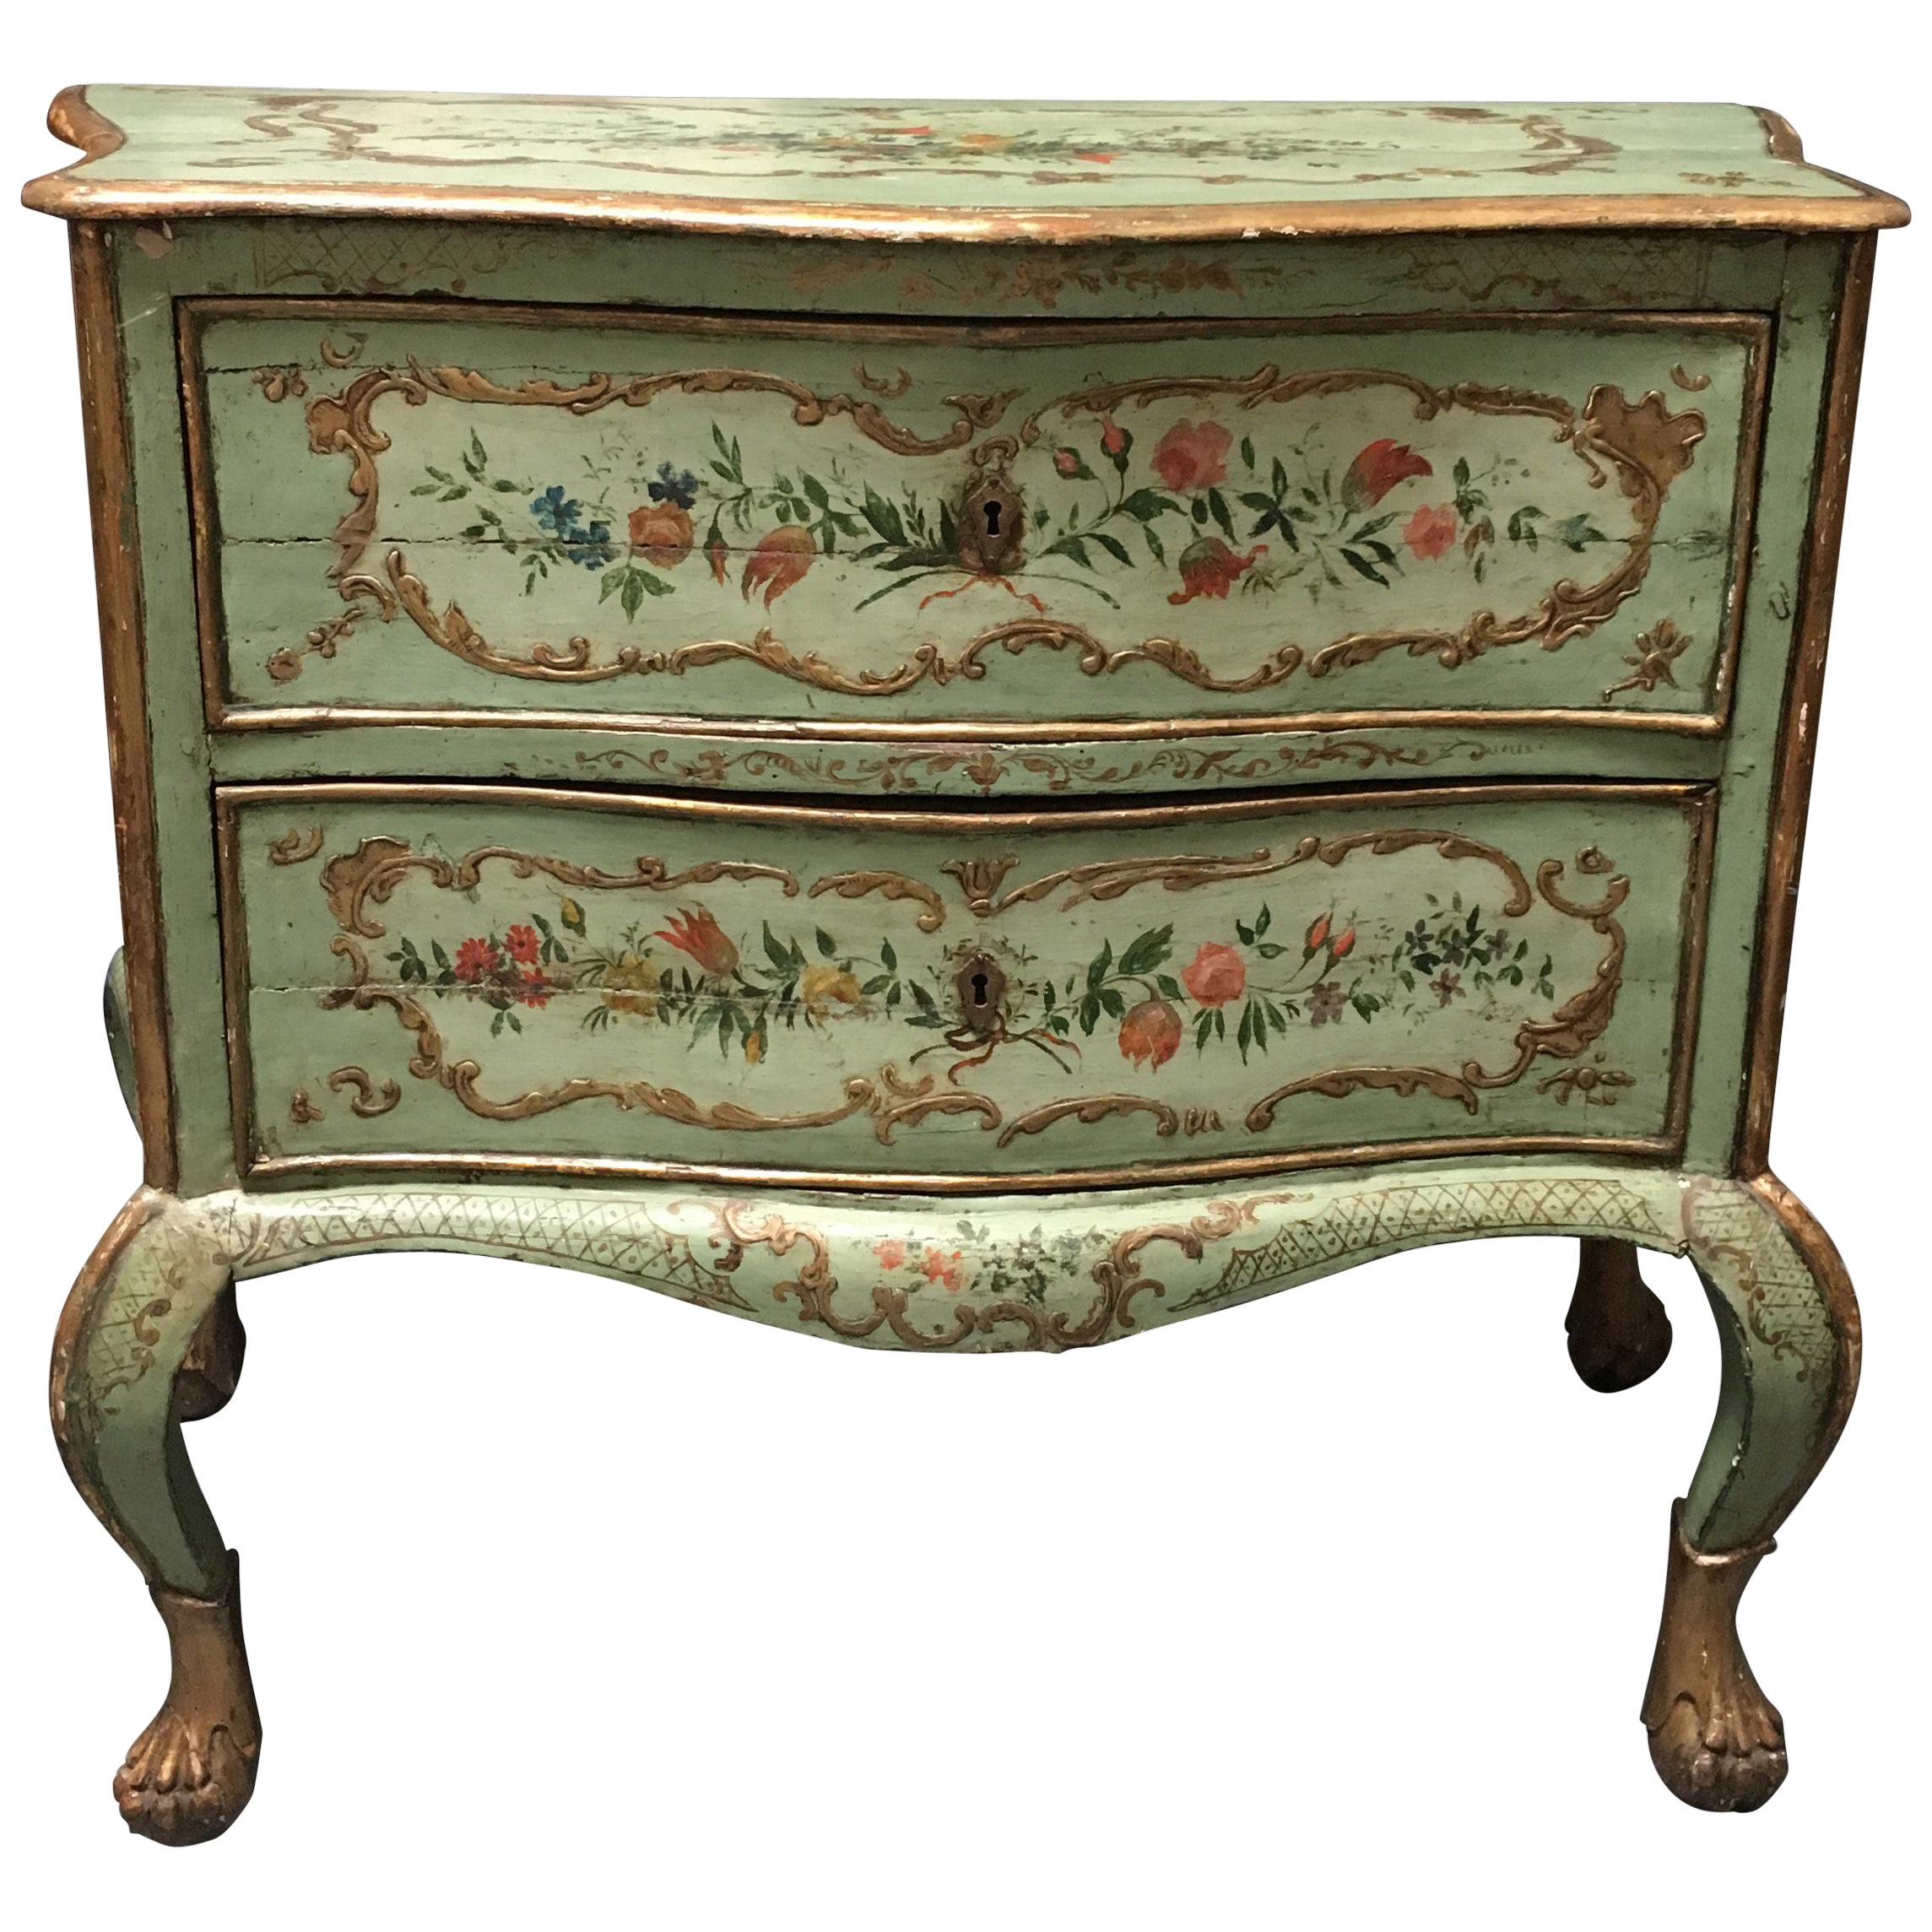  Venetian Rococo Style Serpentine Painted Commode